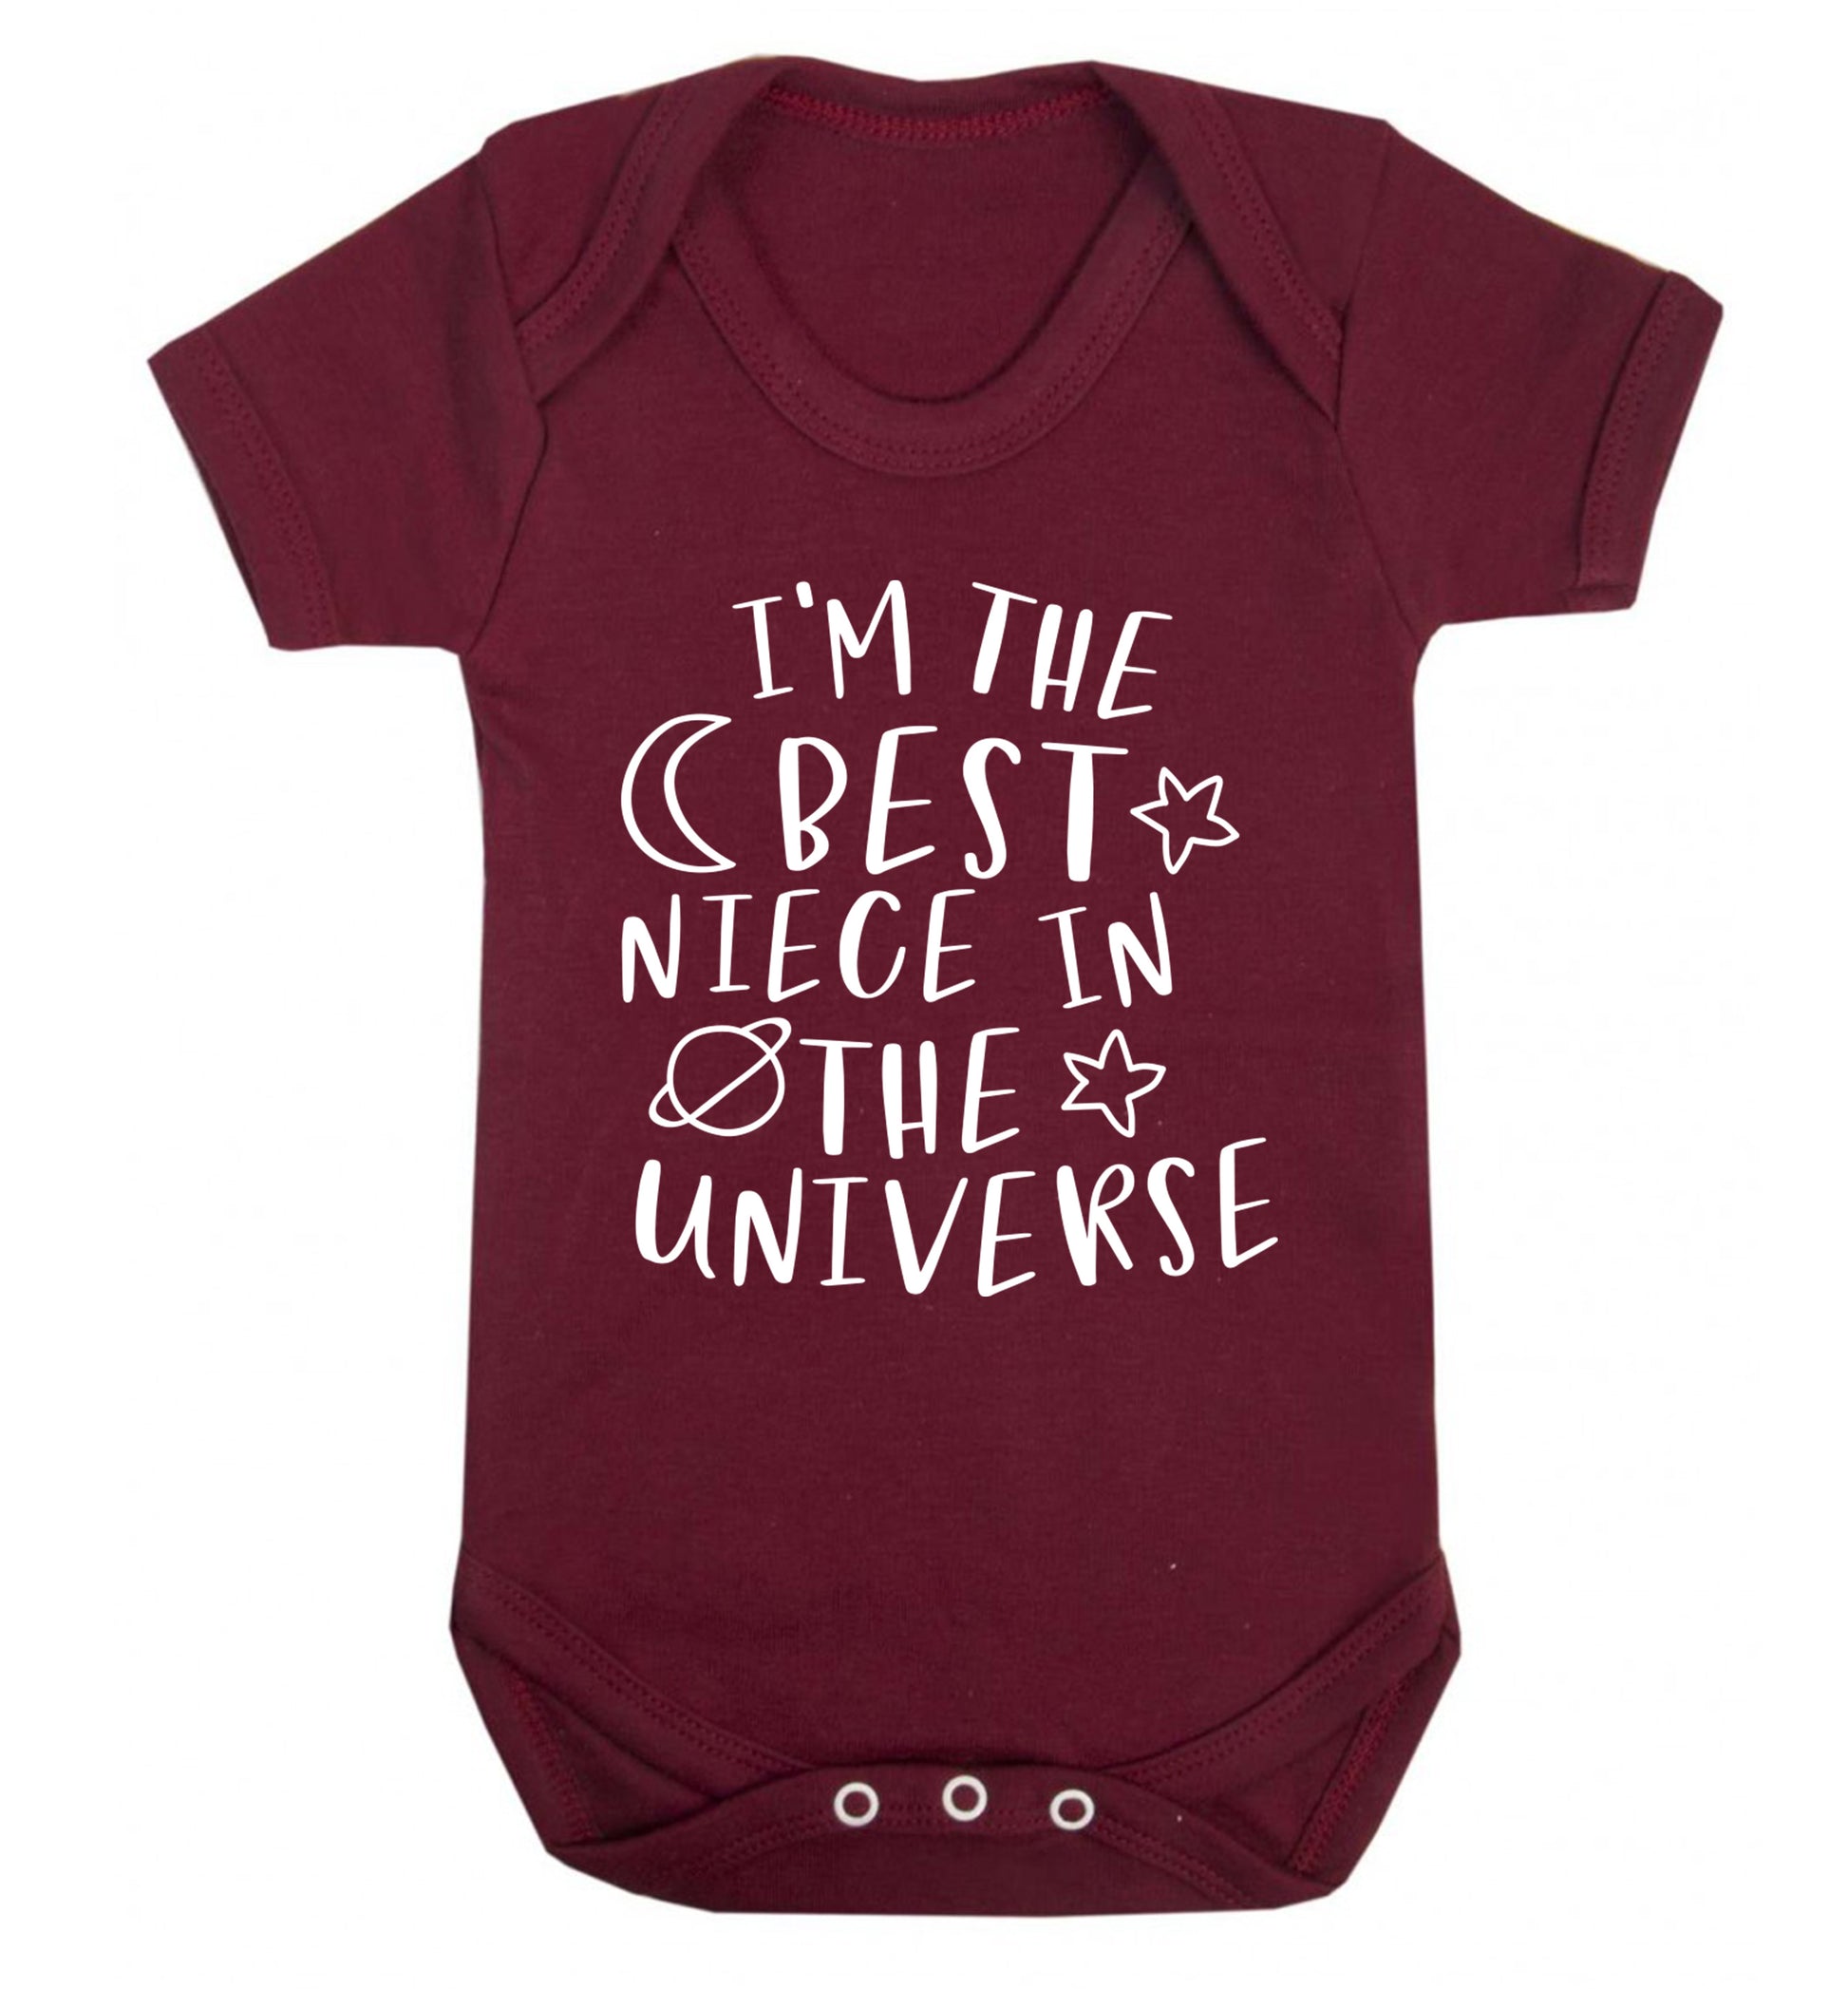 I'm the best niece in the universe Baby Vest maroon 18-24 months